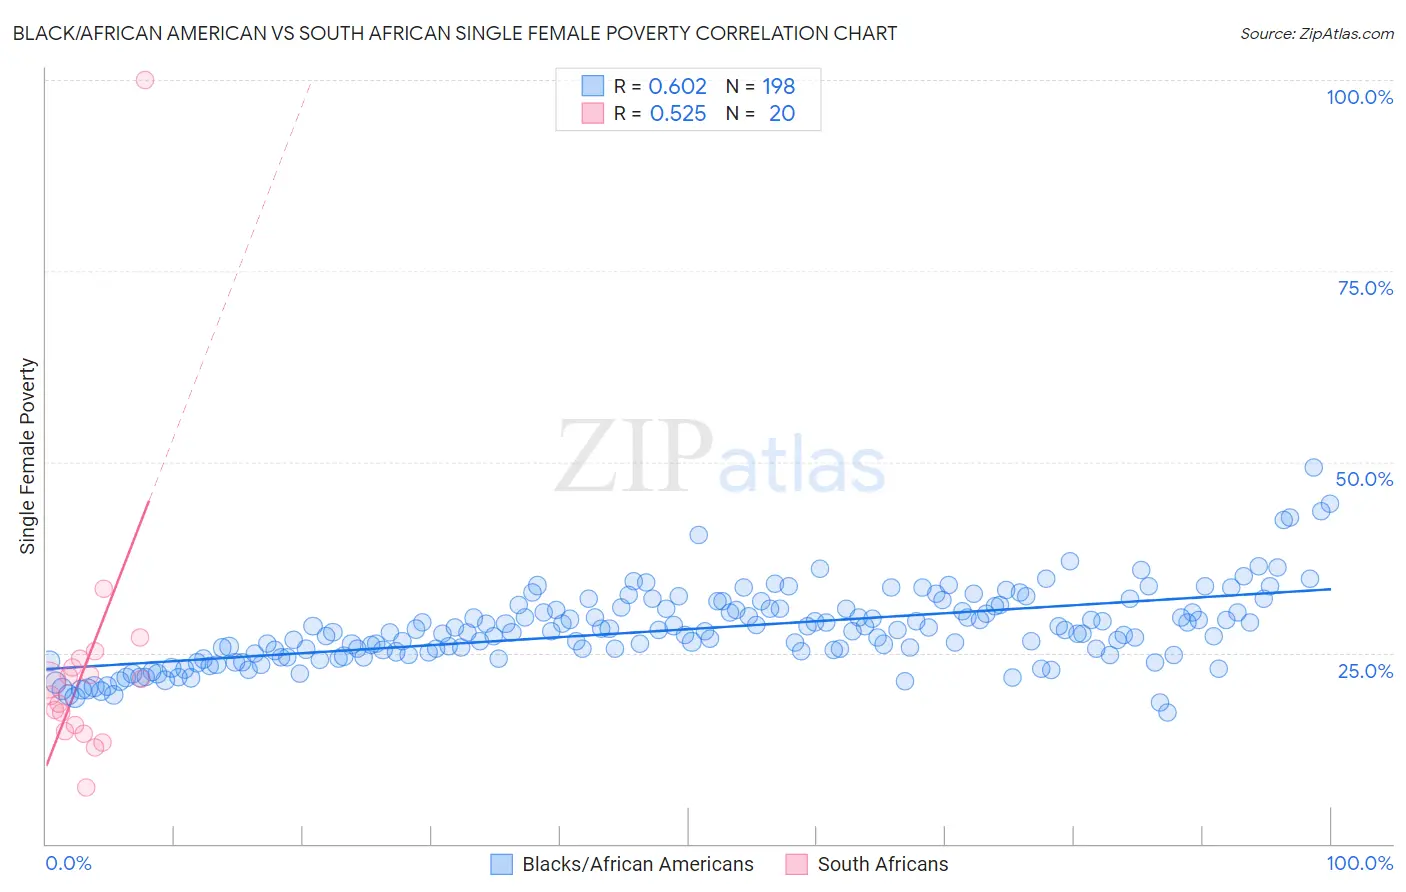 Black/African American vs South African Single Female Poverty